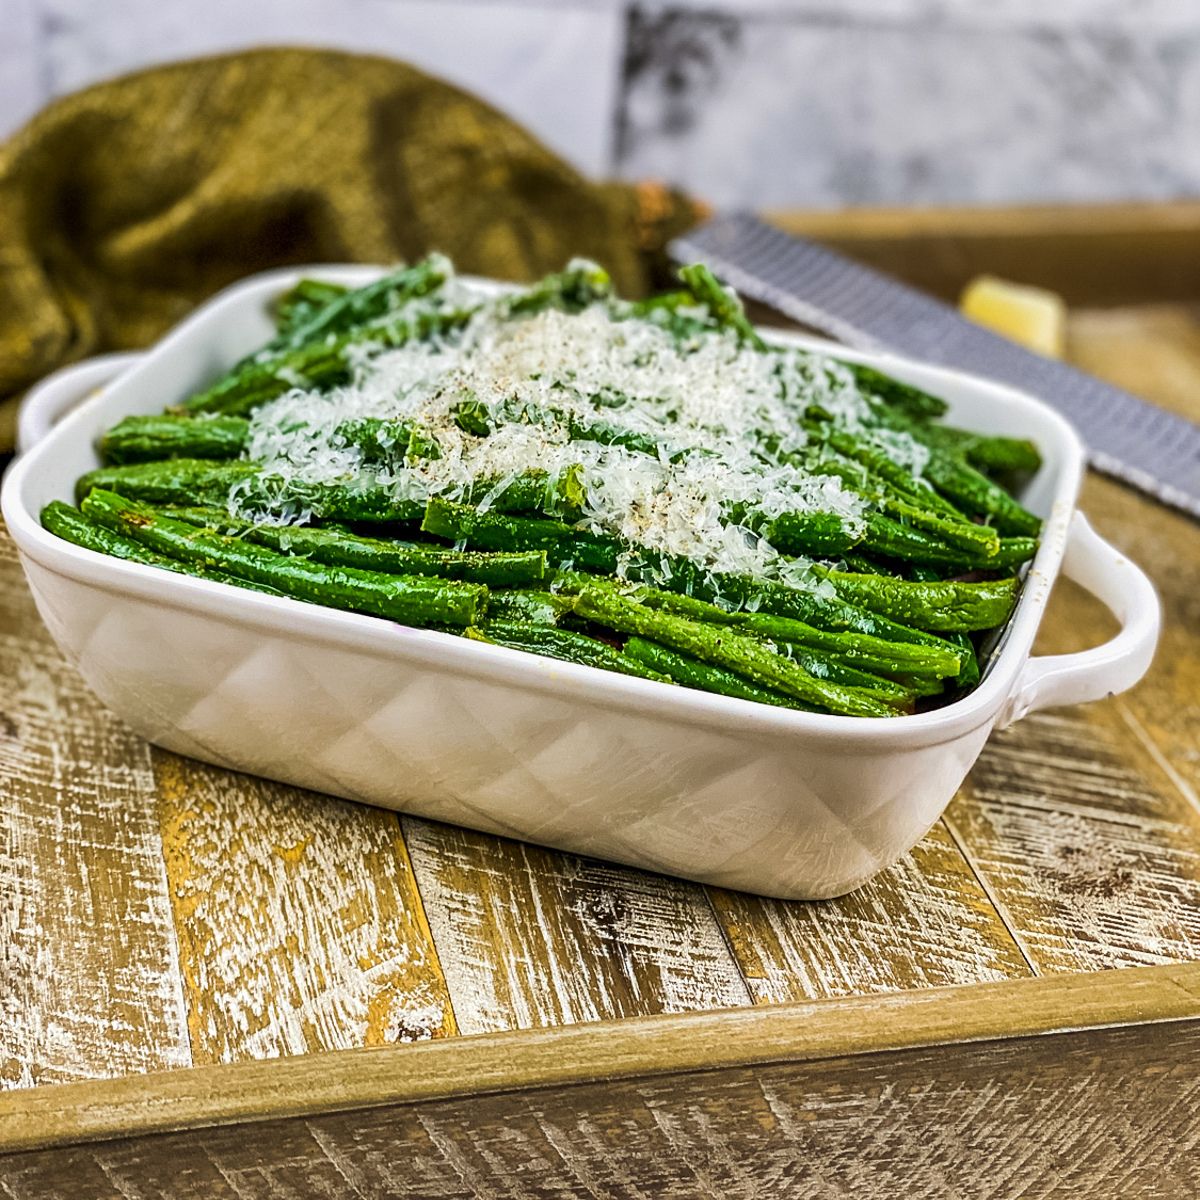 Oven-Roasted Parmesan Green Beans